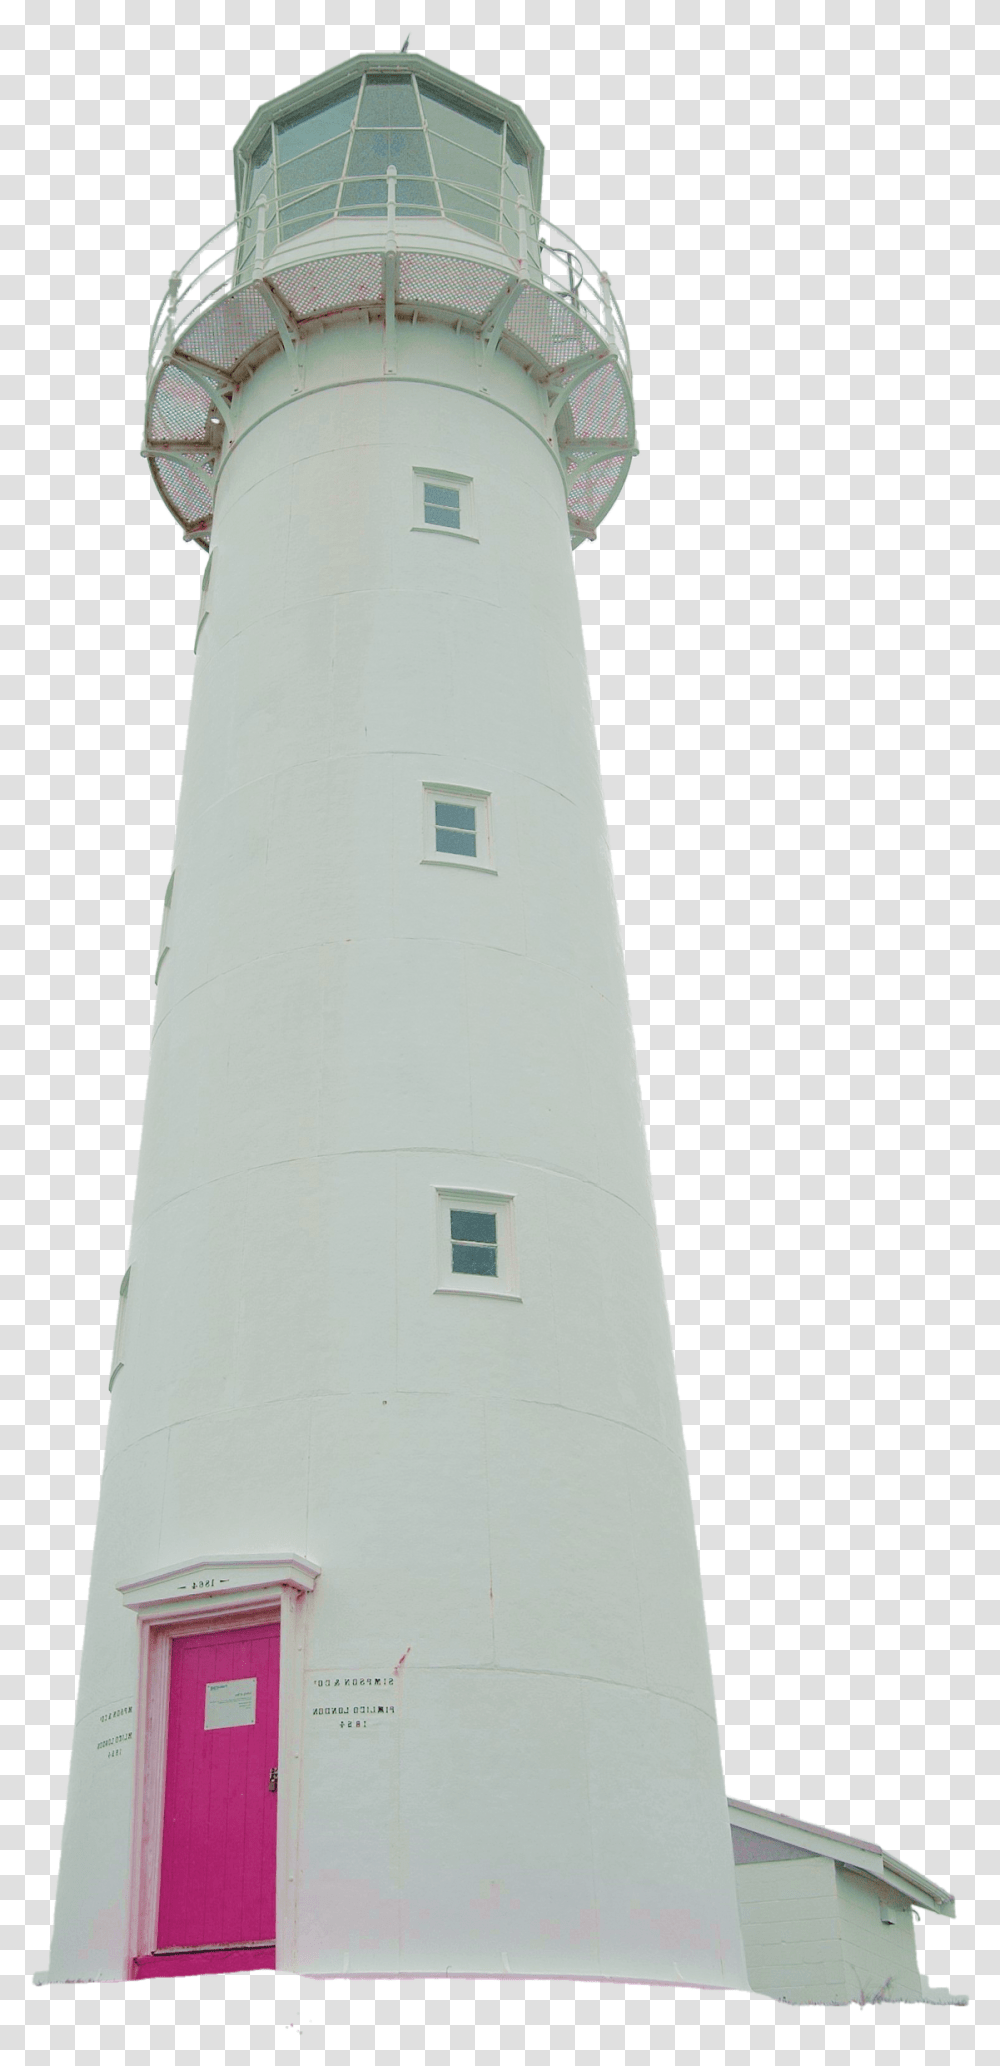 Lighthouse Image Cape May, Architecture, Building, Tower, Beacon Transparent Png